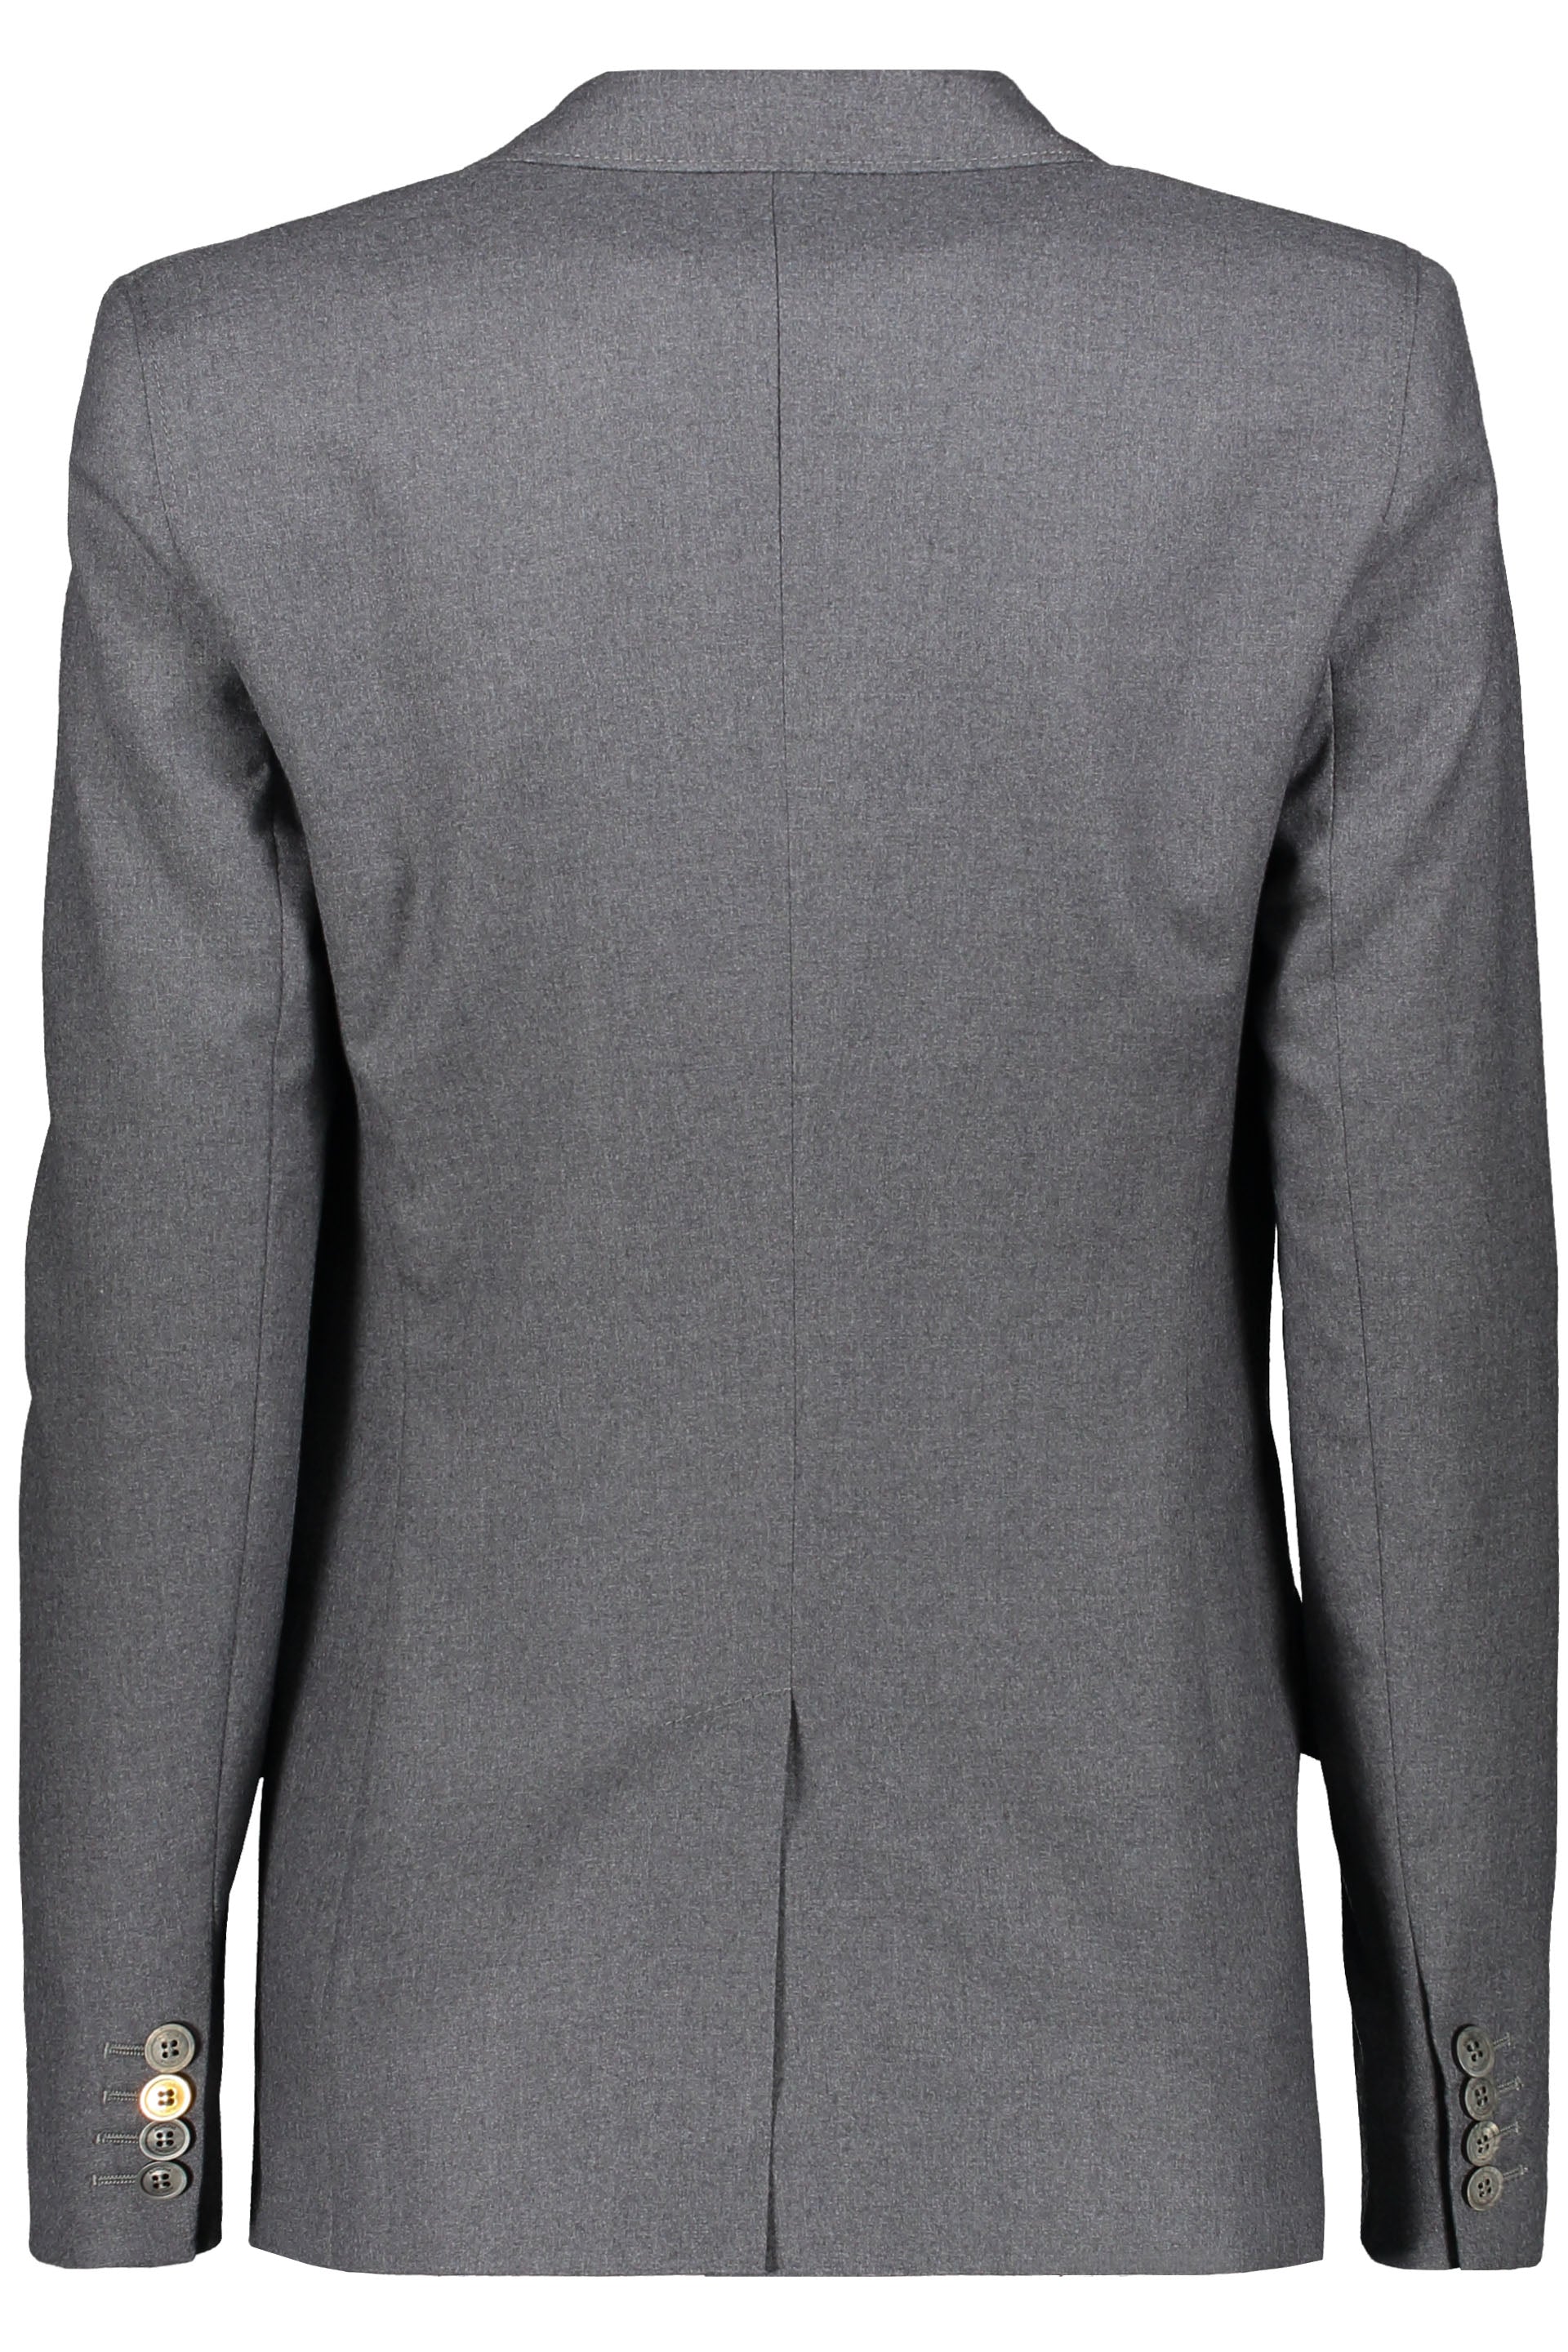 Agnona-OUTLET-SALE-Wool-single-breasted-blazer-Jacken-Mantel-36-ARCHIVE-COLLECTION.jpg